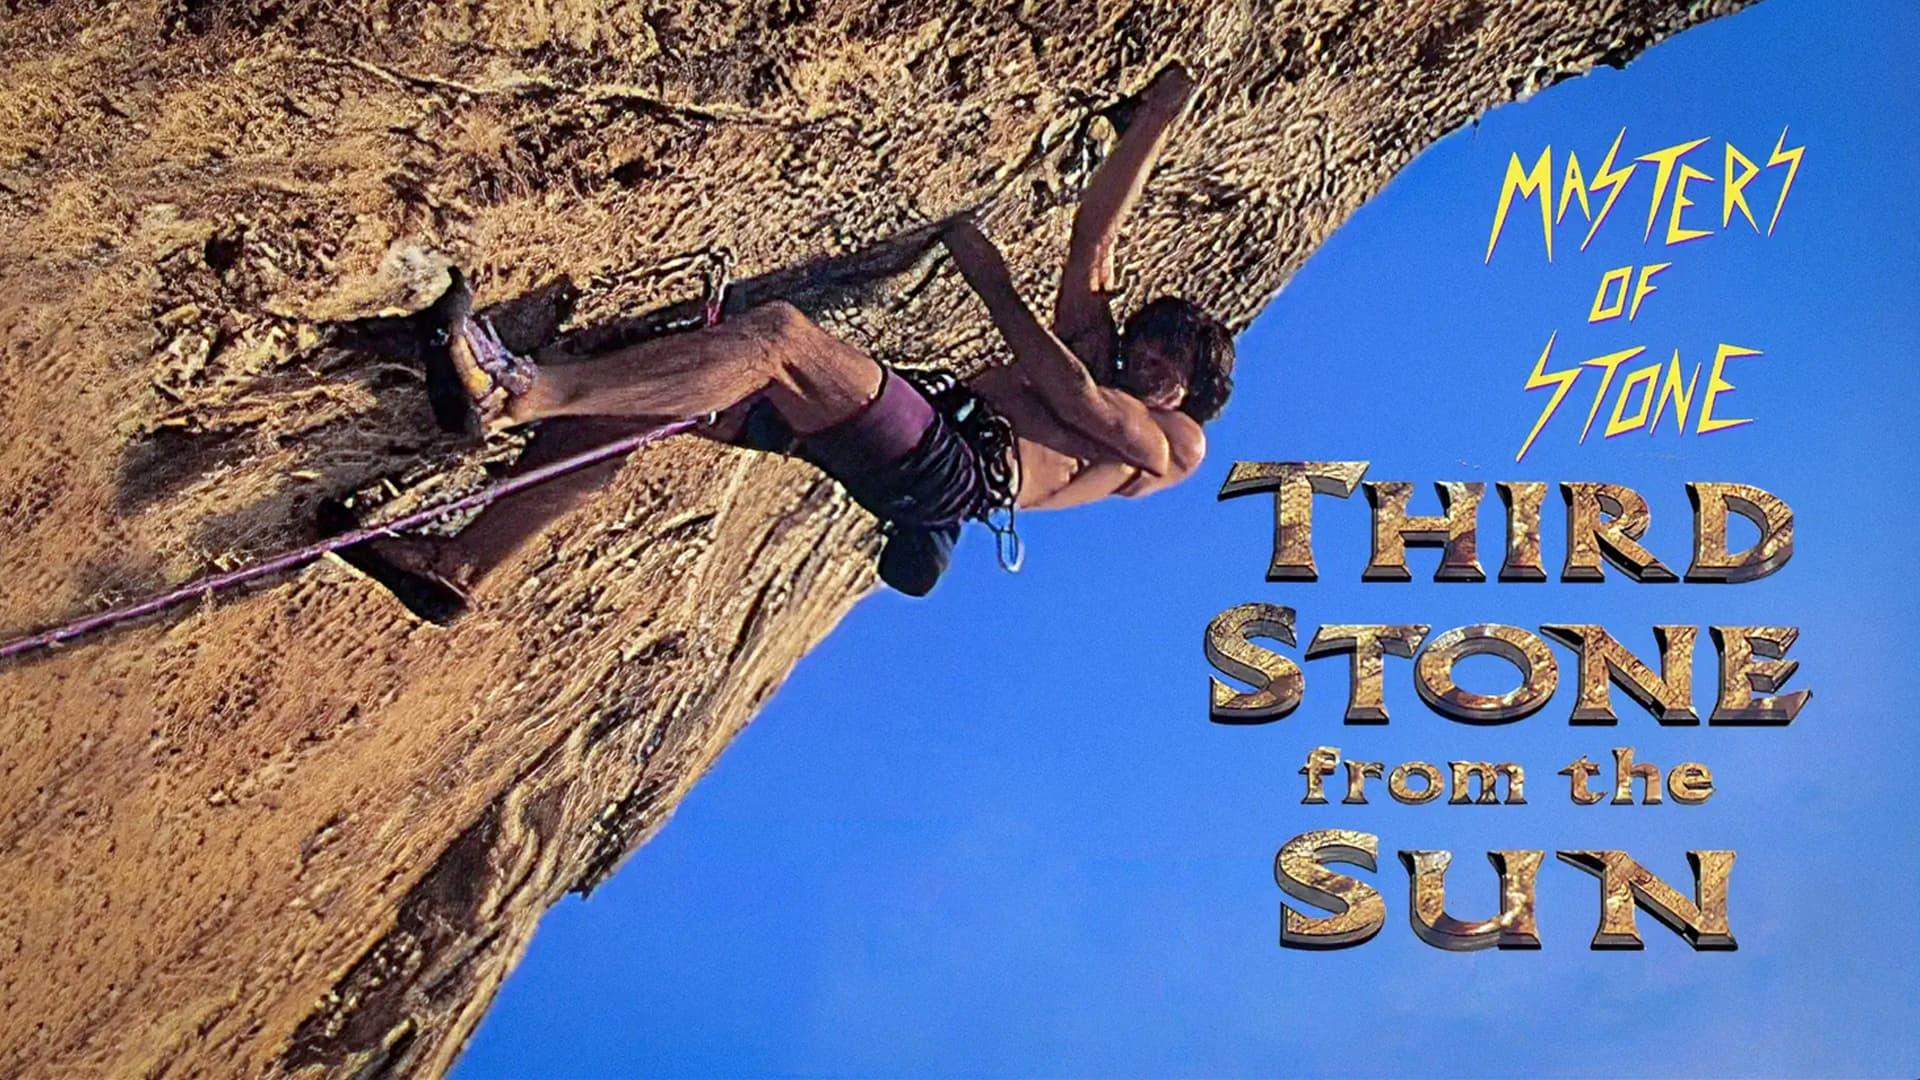 Masters of Stone III - Third stone from the sun backdrop